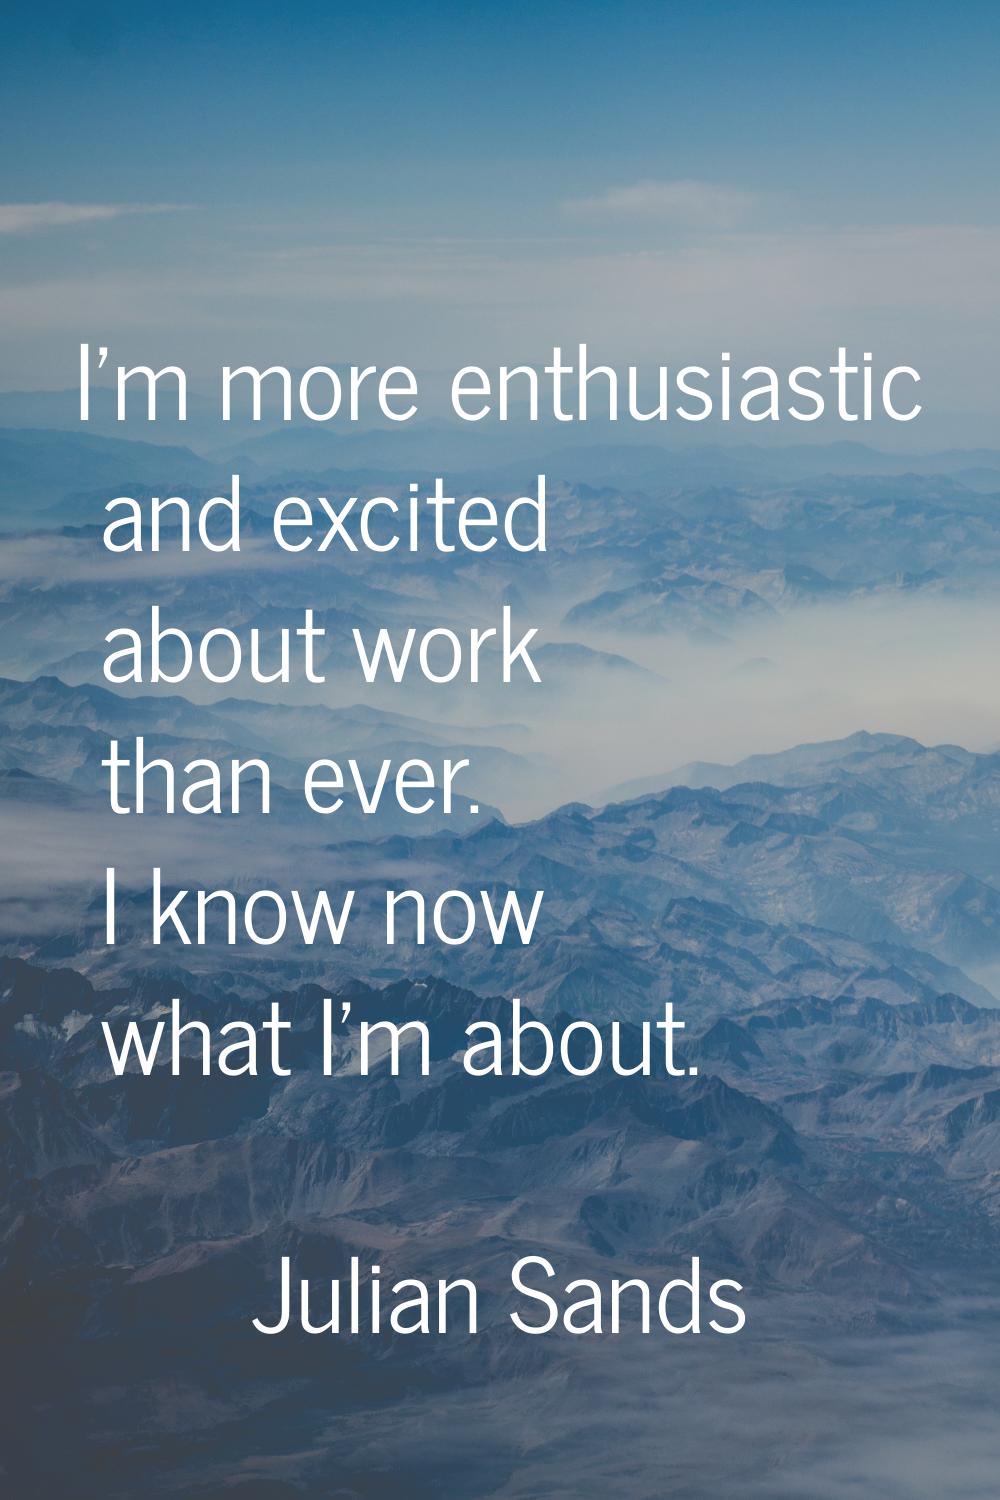 I'm more enthusiastic and excited about work than ever. I know now what I'm about.